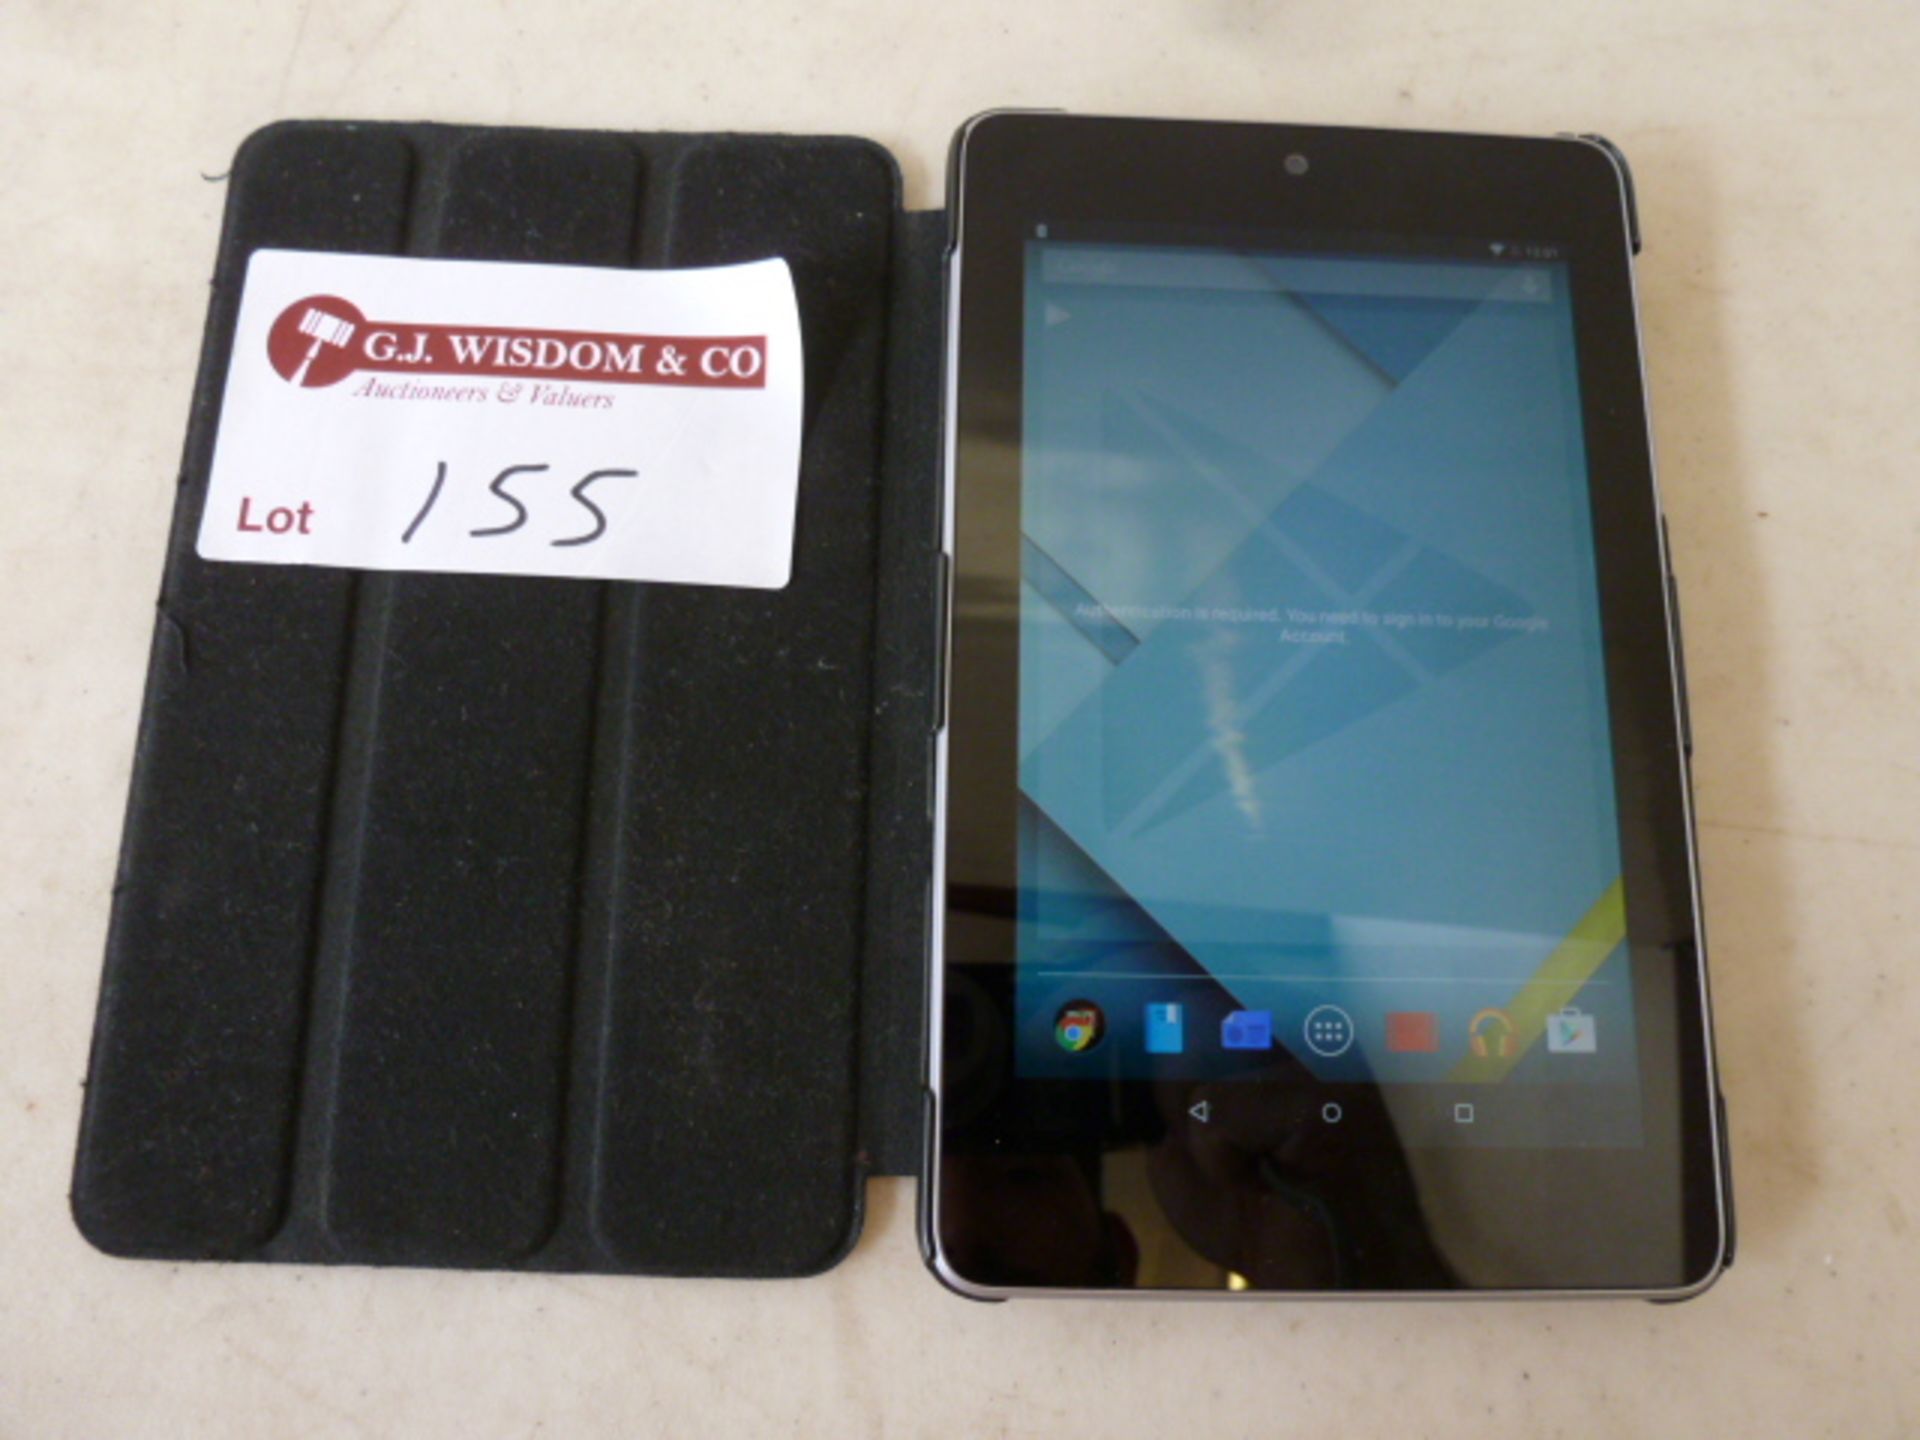 Asus Nexus Mini 7" Display Wi-Fi Tablet, Model ME370T Tablet, with 16GB, Running Android OS. Comes